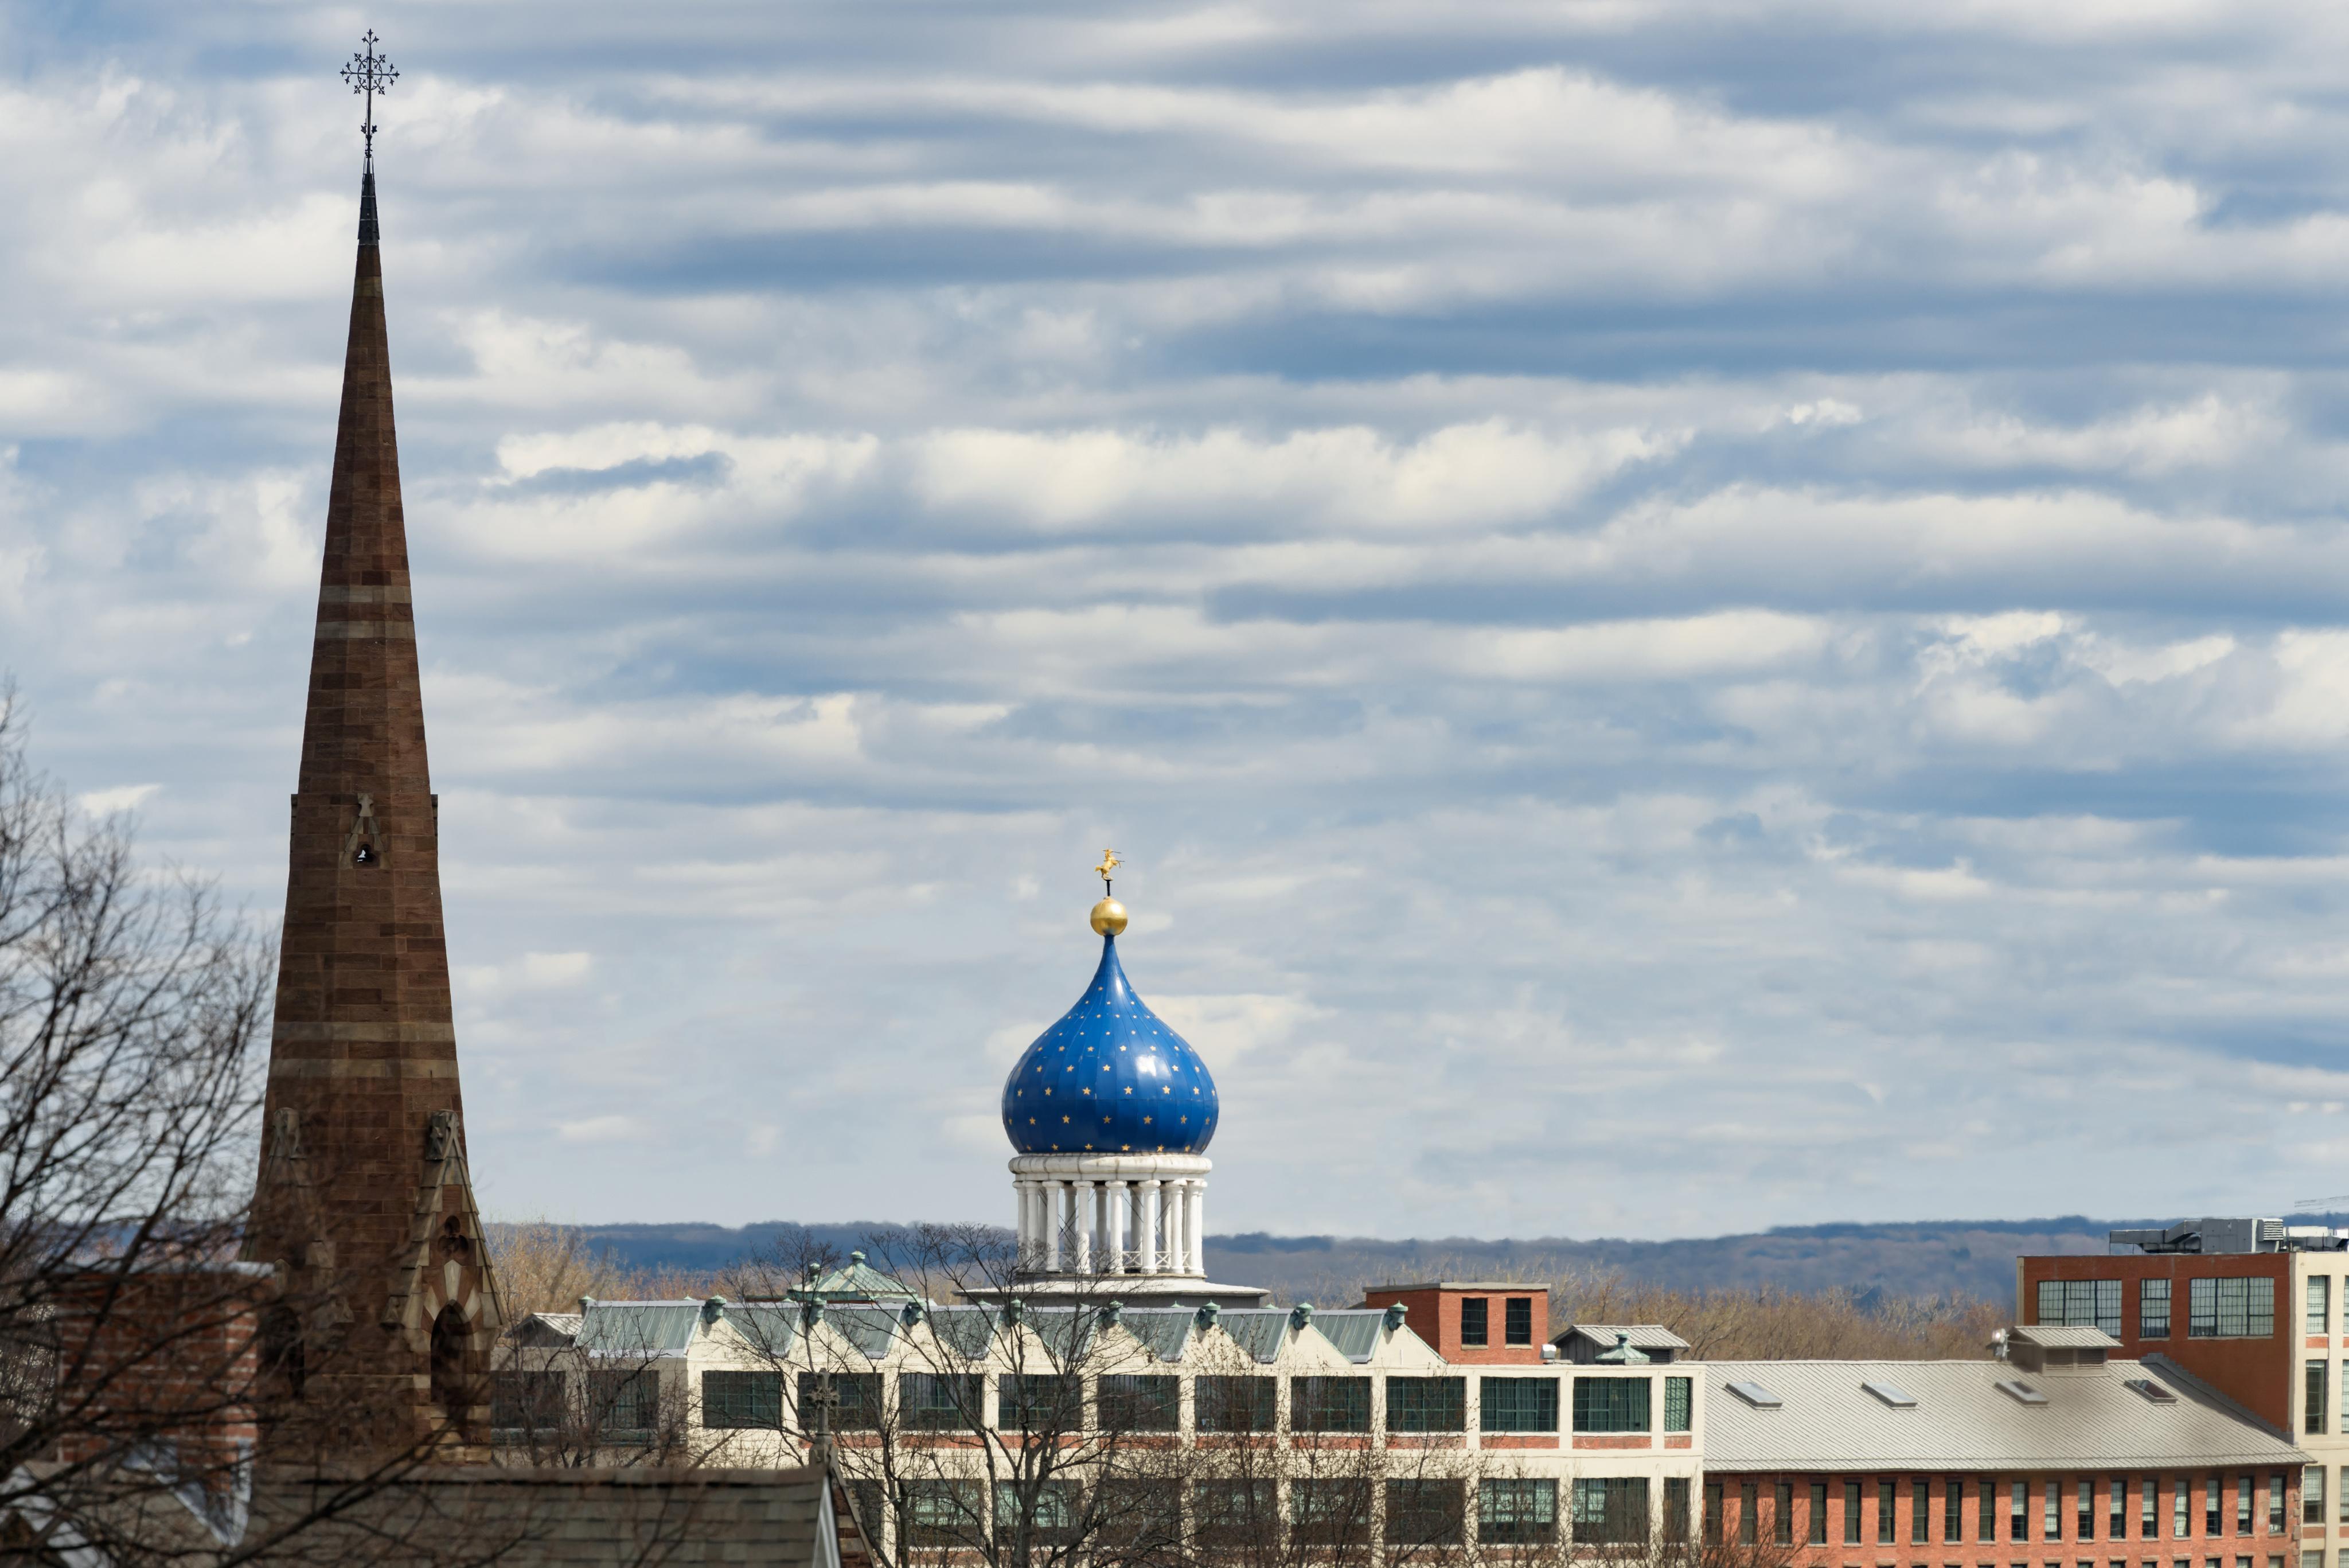 The Blue Onion Dome of the Armory and the spire of the Church against a cloudy blue sky.